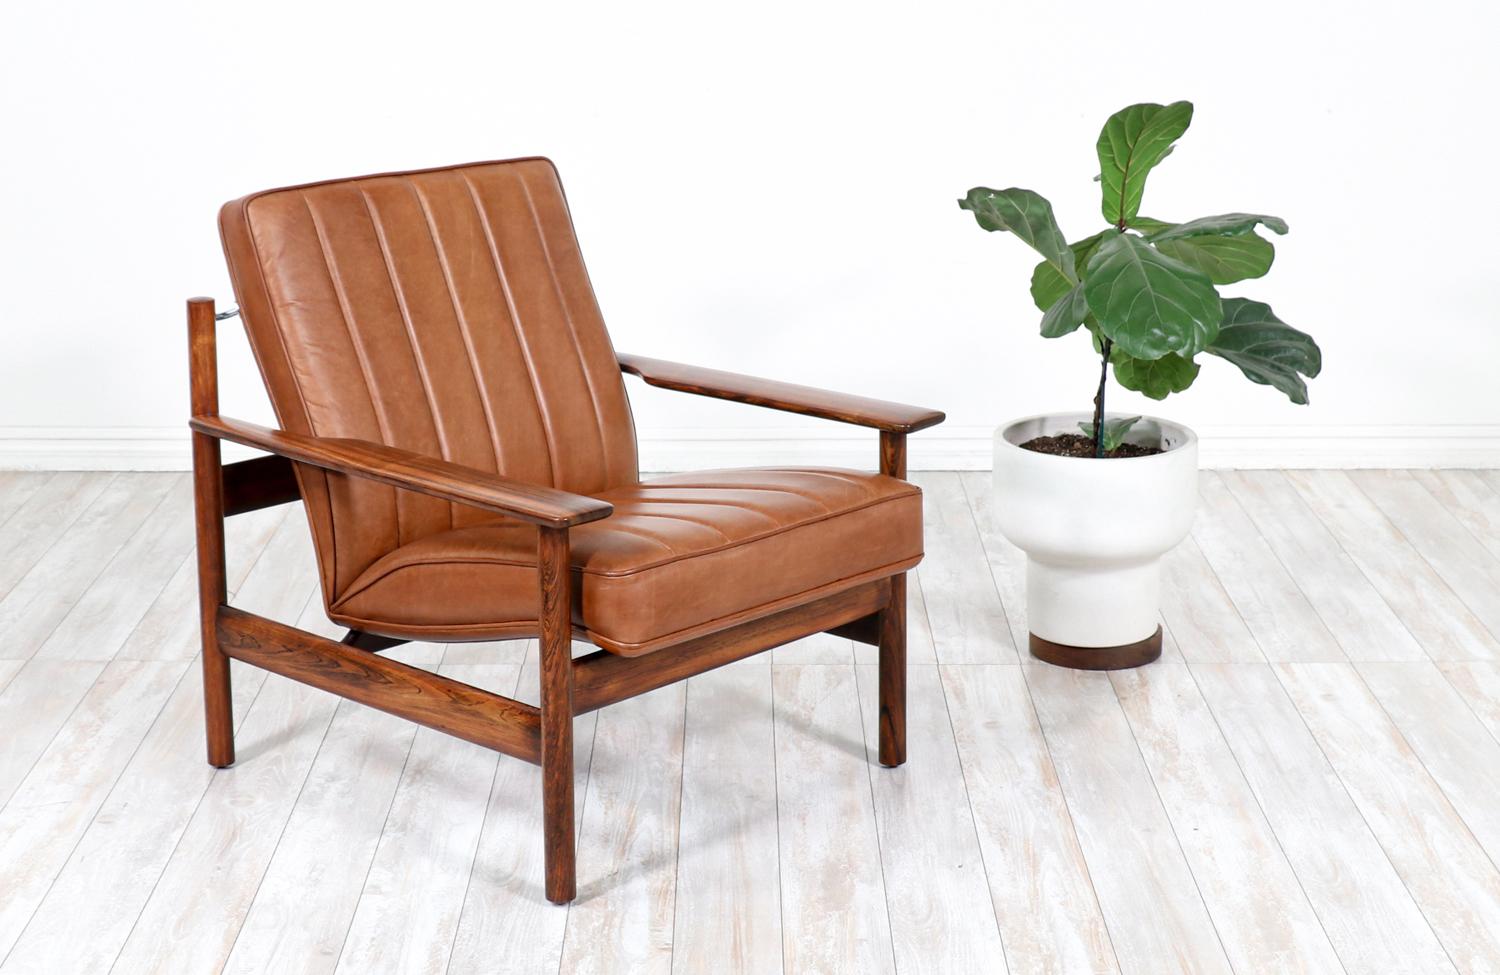 Cozy lounge chair designed by Sven Ivar Dysthe for Dokka Møbler in Norway circa 1960s. This rare and exclusive Model-1001 design features a solid Brazilian rosewood frame that supports the newly upholstered seat in brown new full-grain leather. The